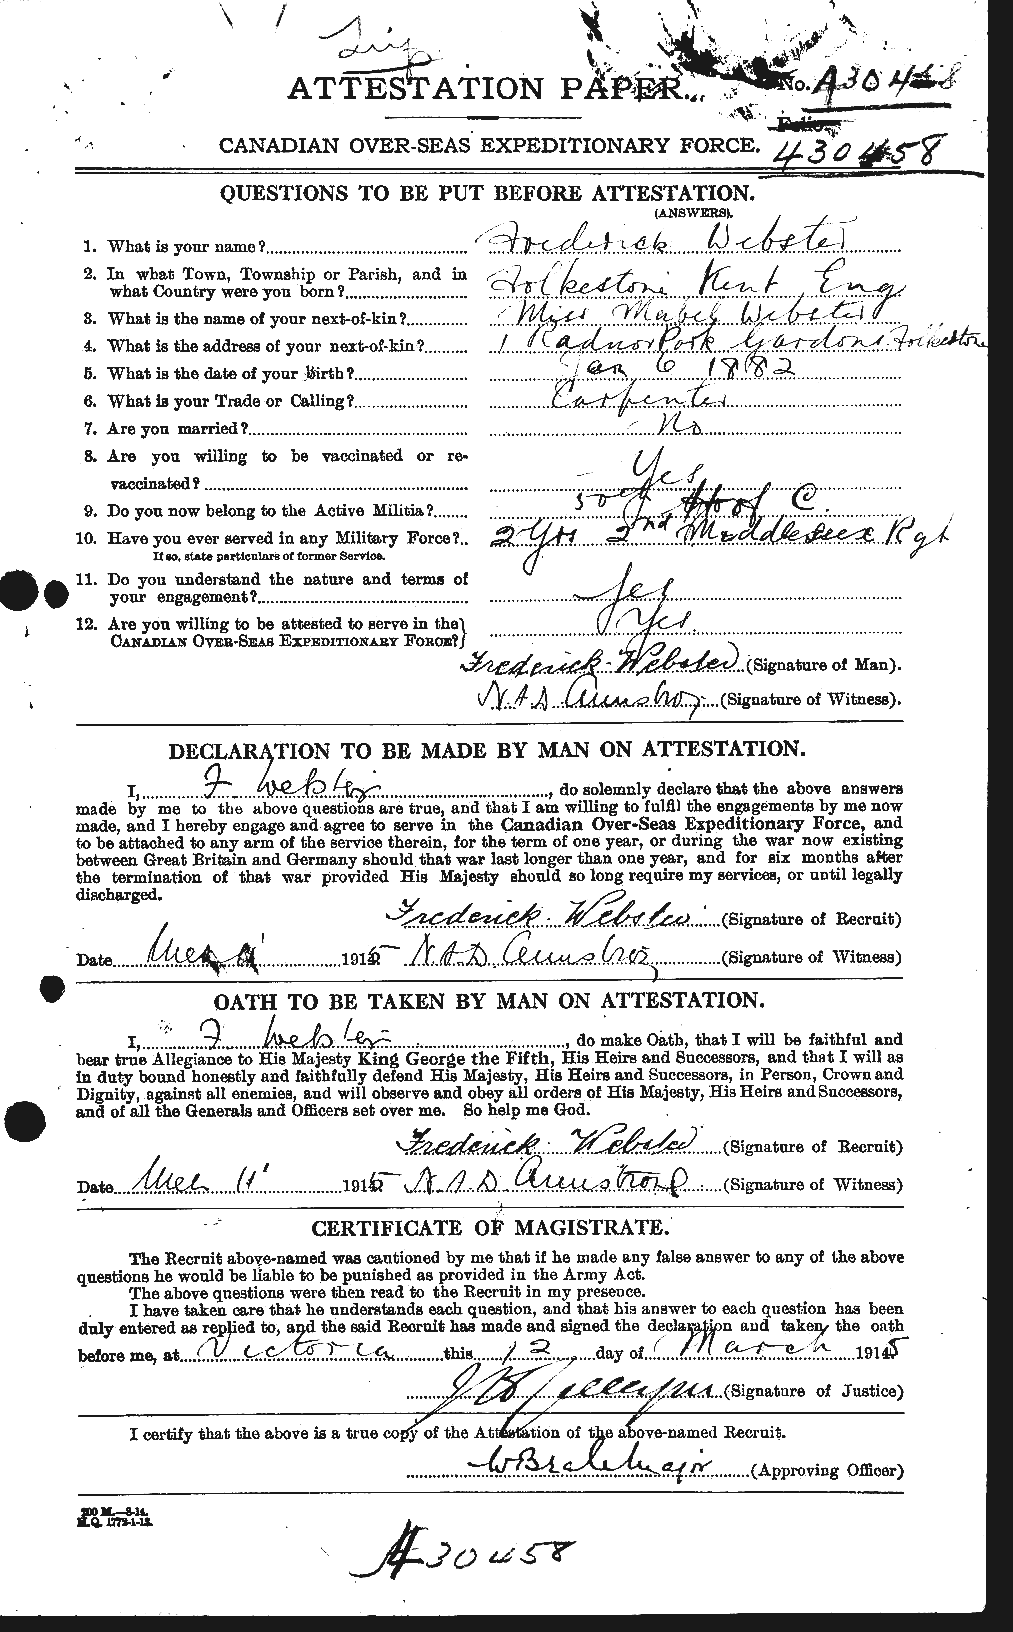 Personnel Records of the First World War - CEF 670359a